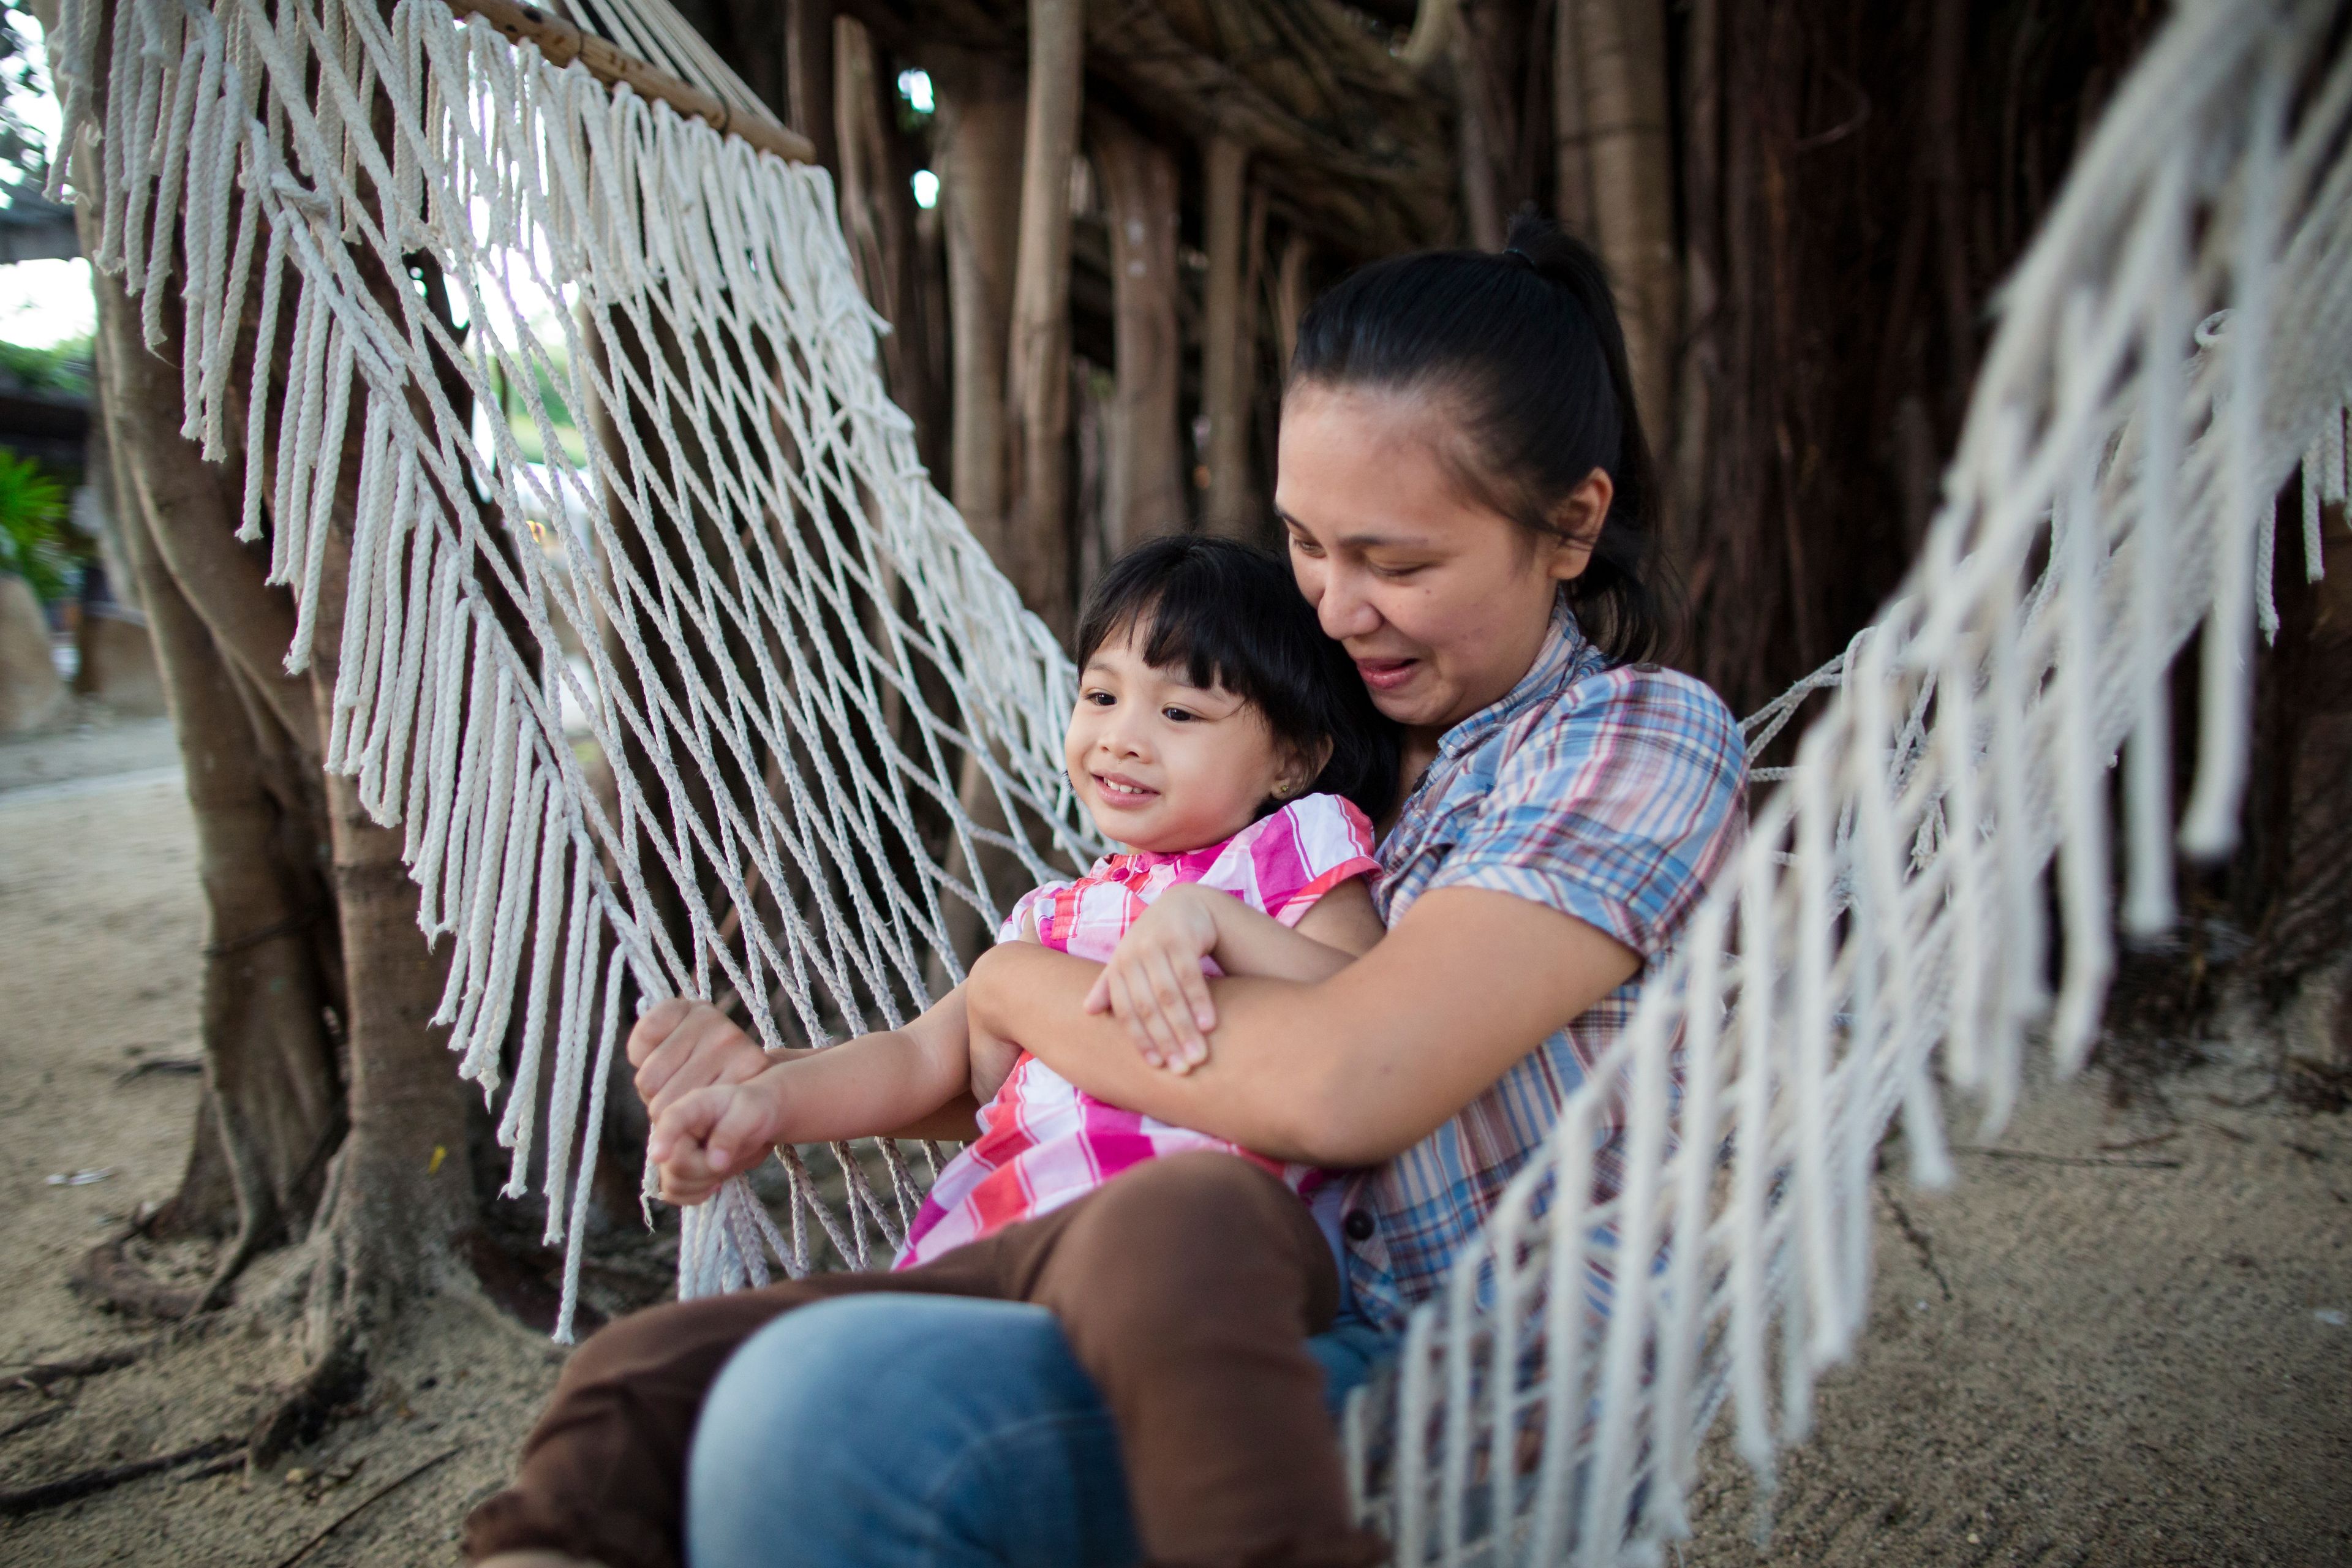 A woman holds her daughter while the two of them swing in a hammock.